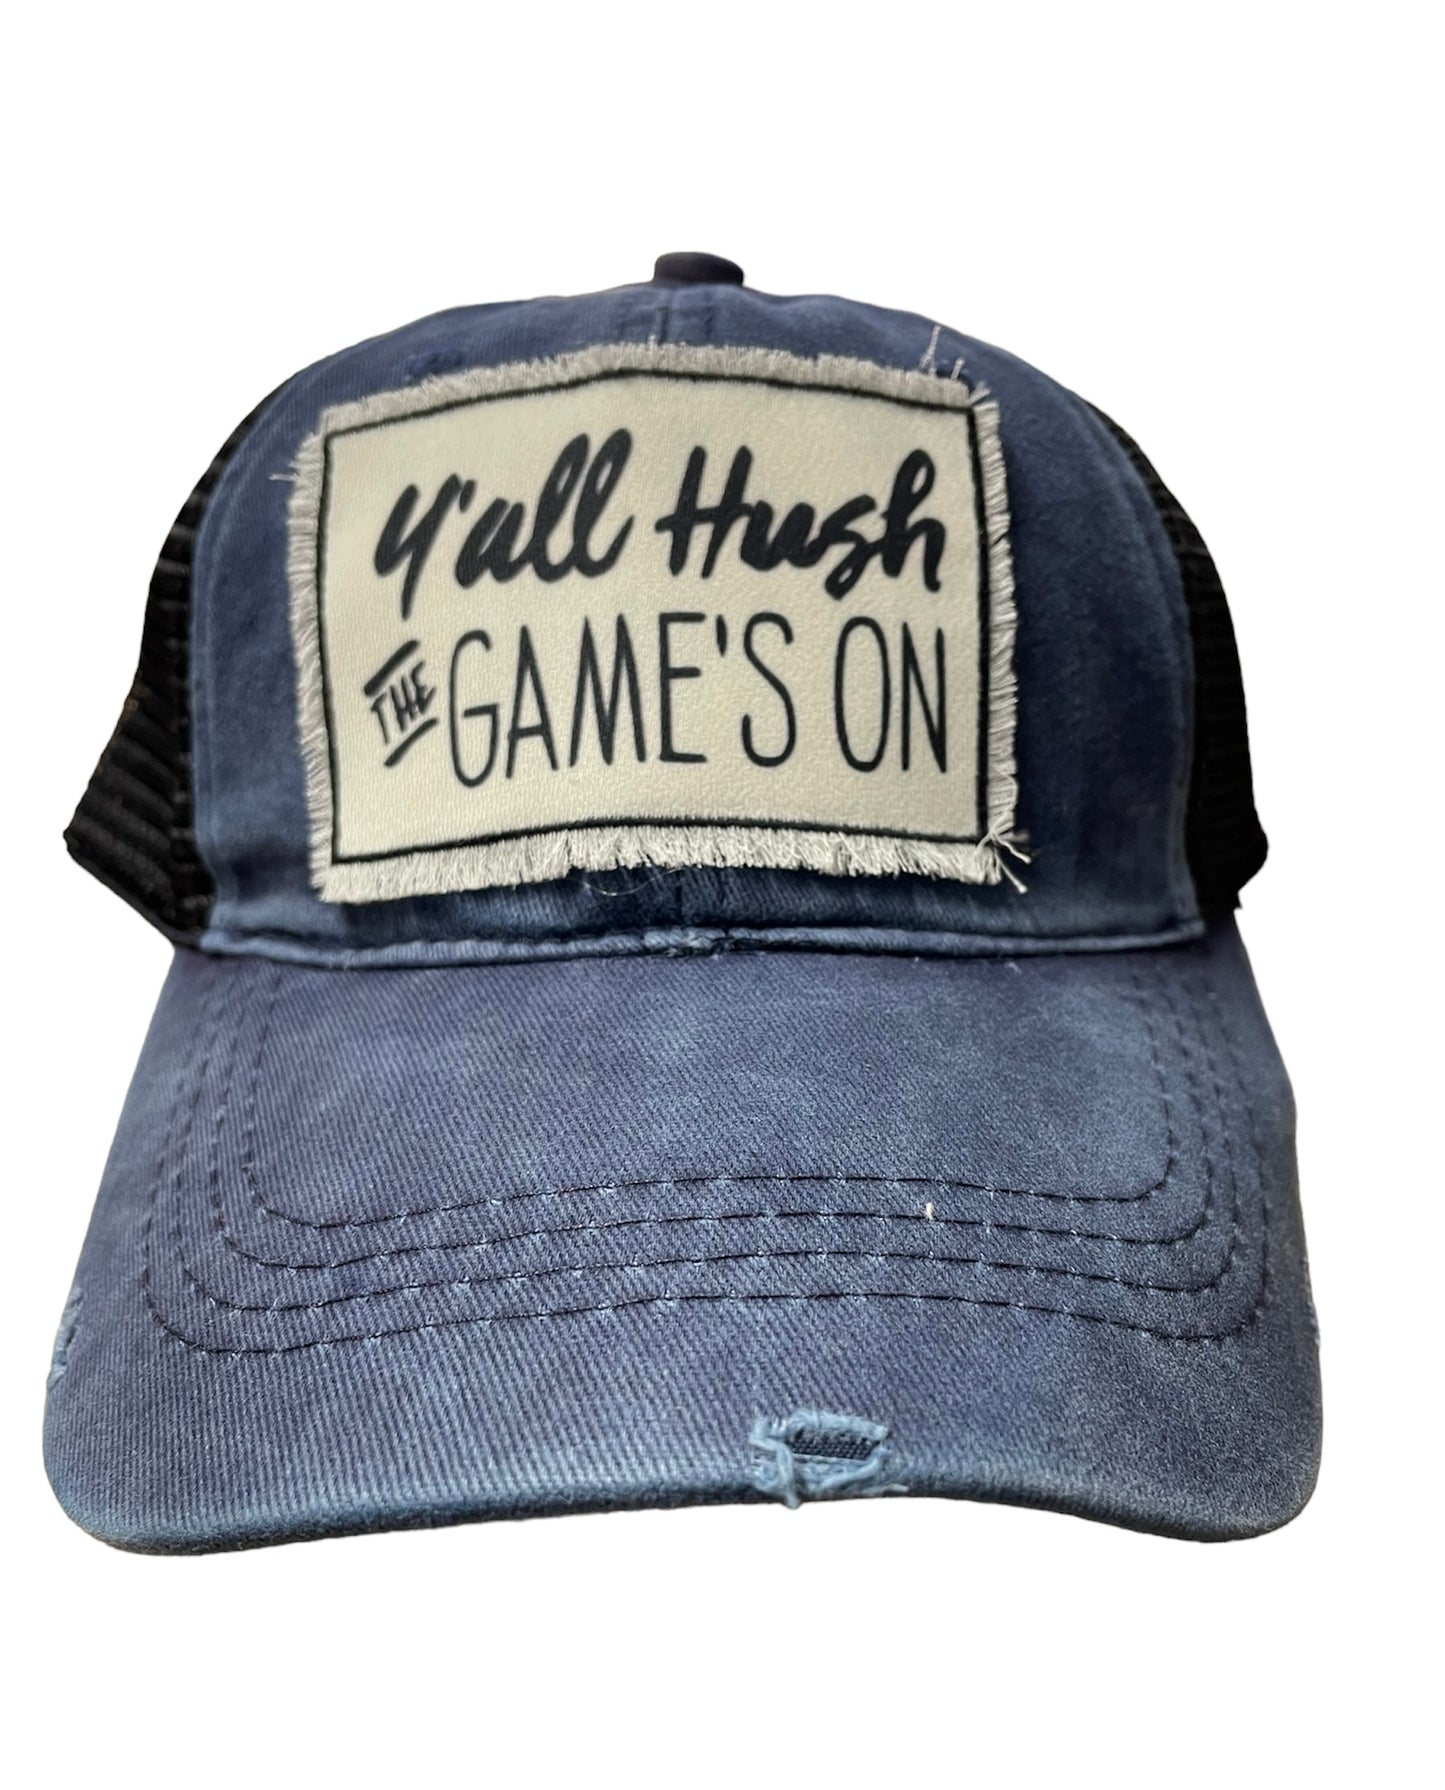 Y’all Hush The Game’s On Hat